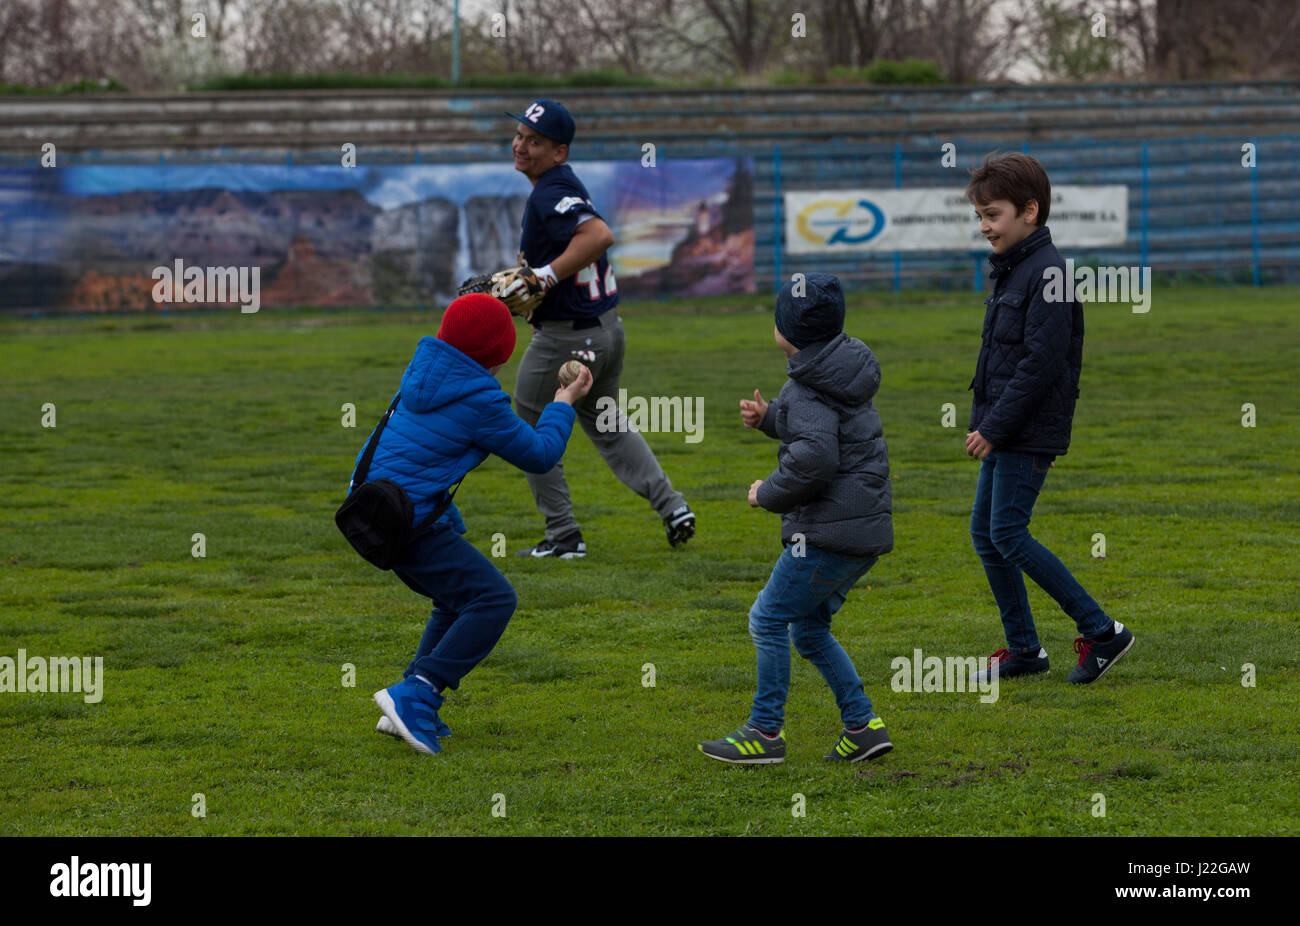 A U.S. Marine with the Black Sea Rotational Force 17.1 plays catch with Romanian children before the Jackie Robinson Day baseball game between the U.S. Marines and a Romanian team  in Constanta, Romania April 15, 2017. The Marine and Romanian players all wore the number 42 jersey in honor of the 70th anniversary of Robinson becoming the first African American player in the Major League Baseball history. (U.S. Marine Corps photo by Cpl. Emily Dorumsgaard) Stock Photo